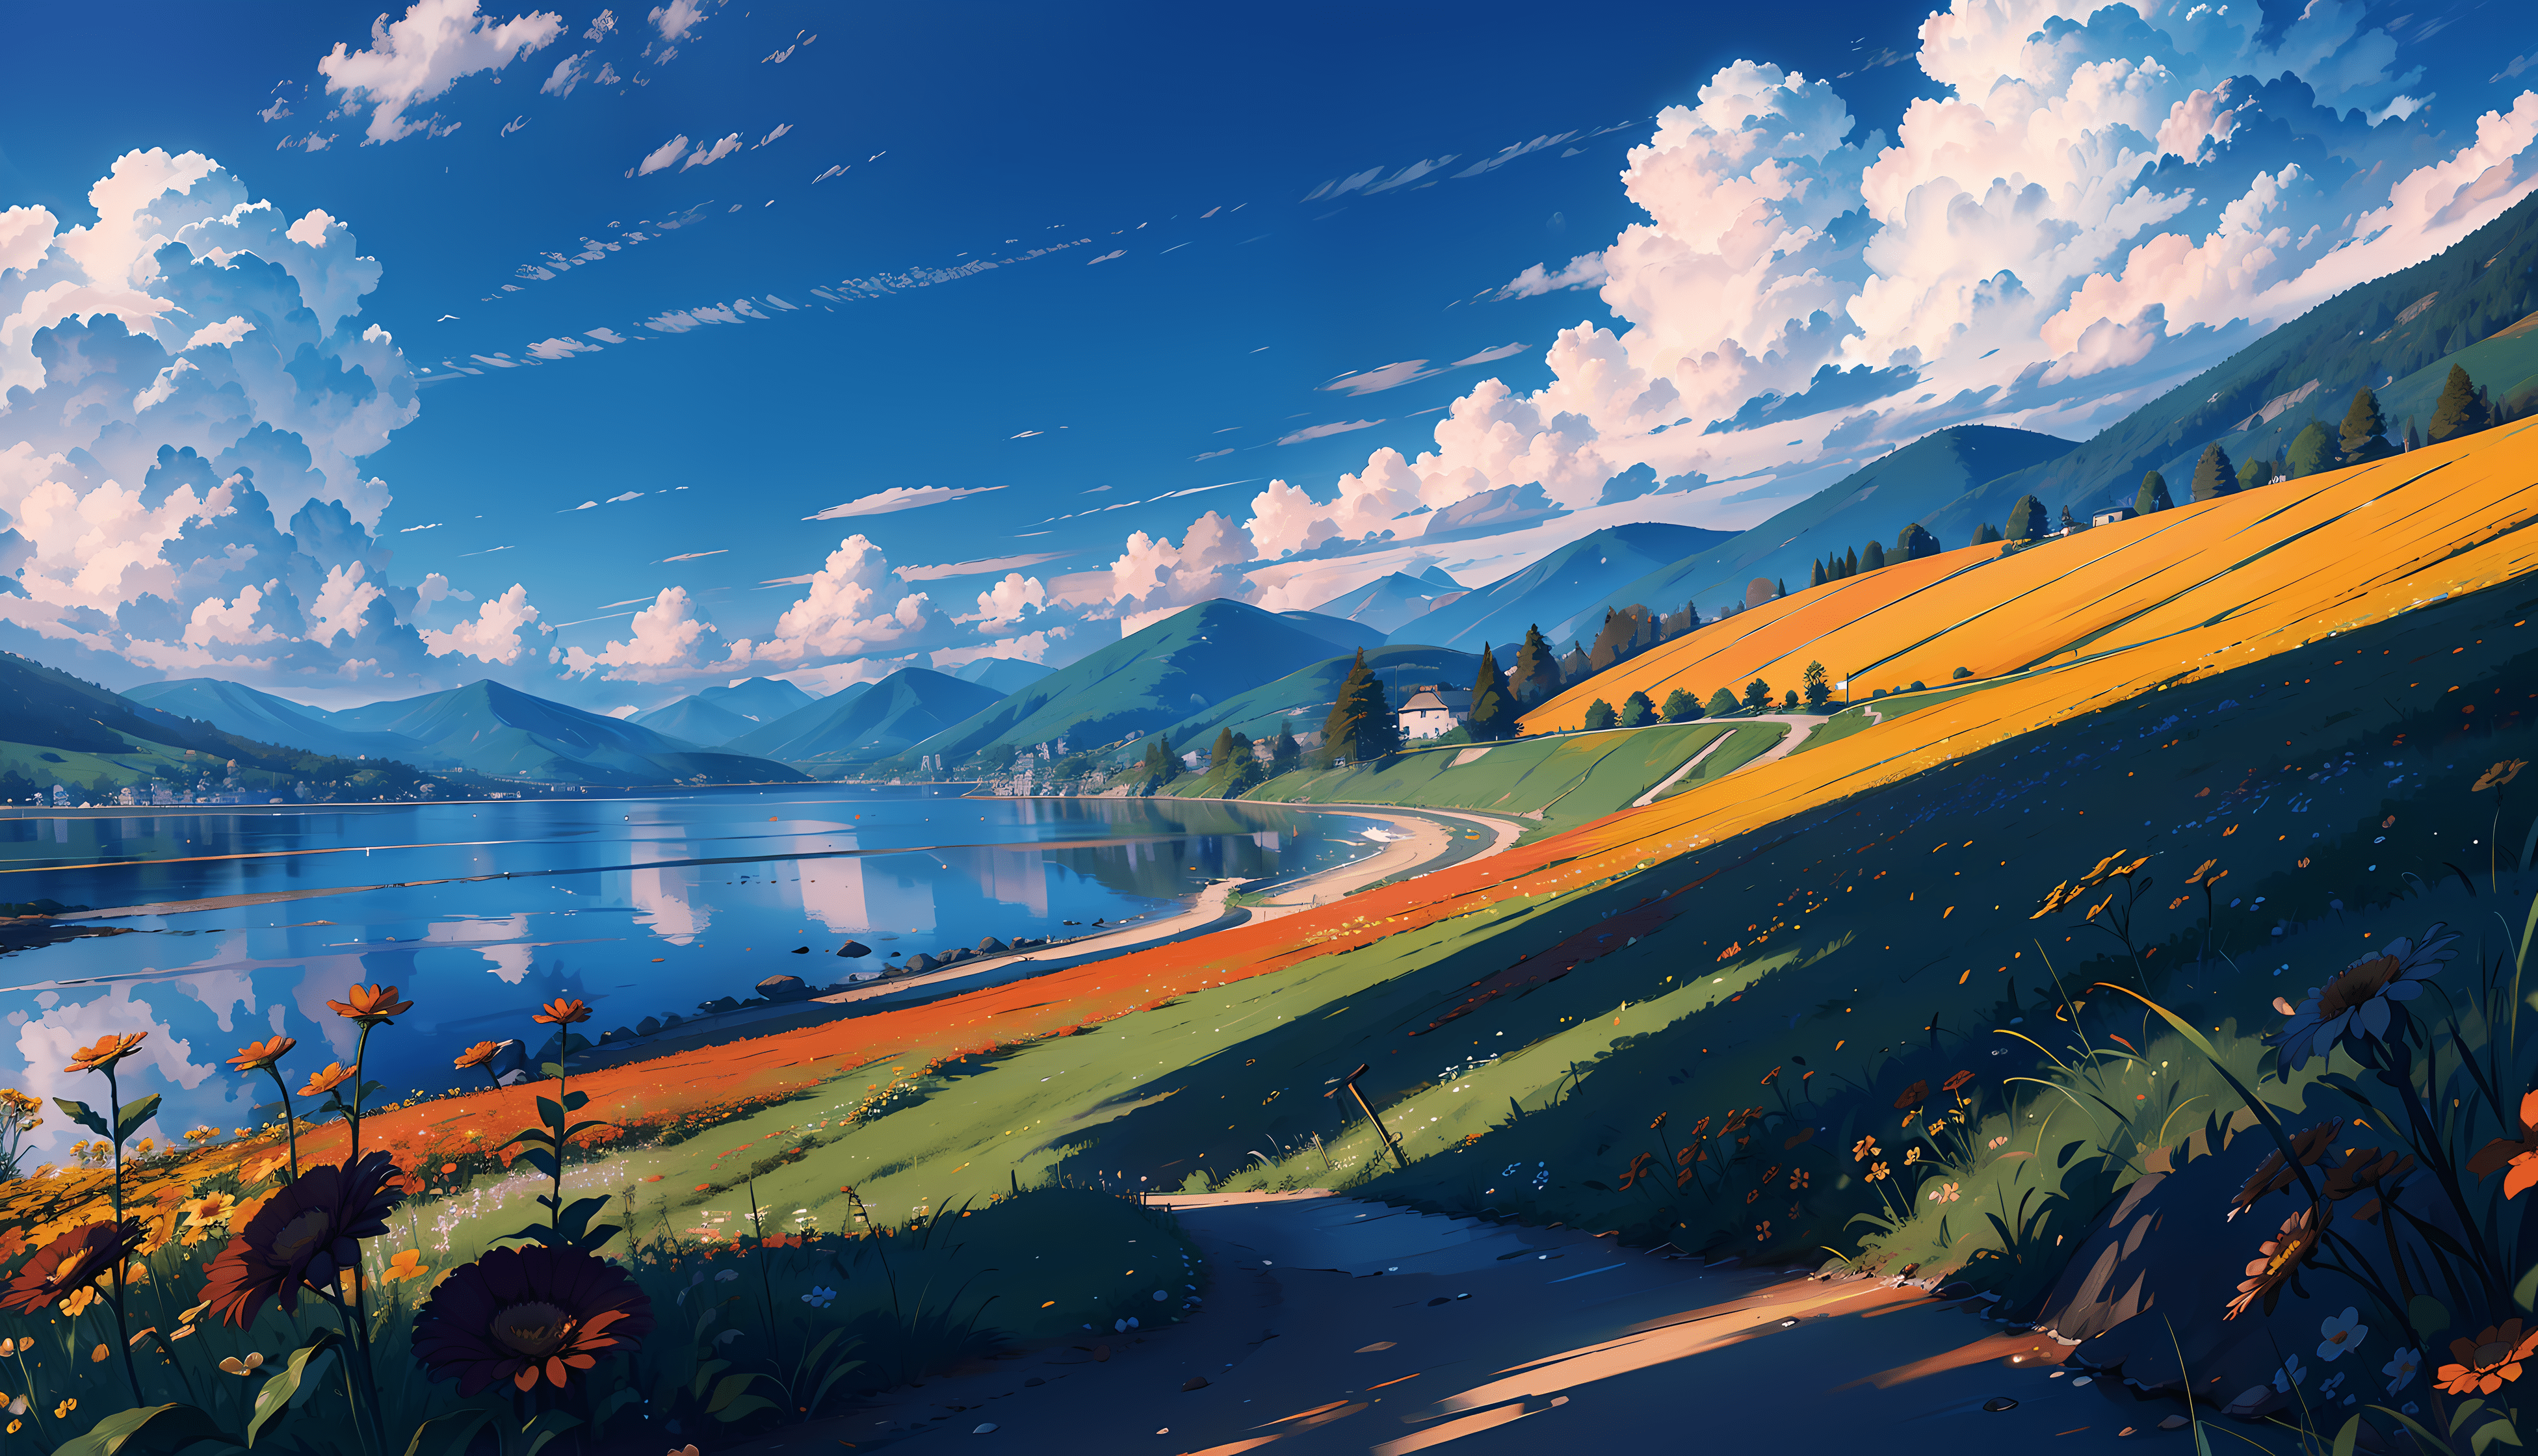 A painting of a road next to a body of water with a mountain in the background - Anime landscape